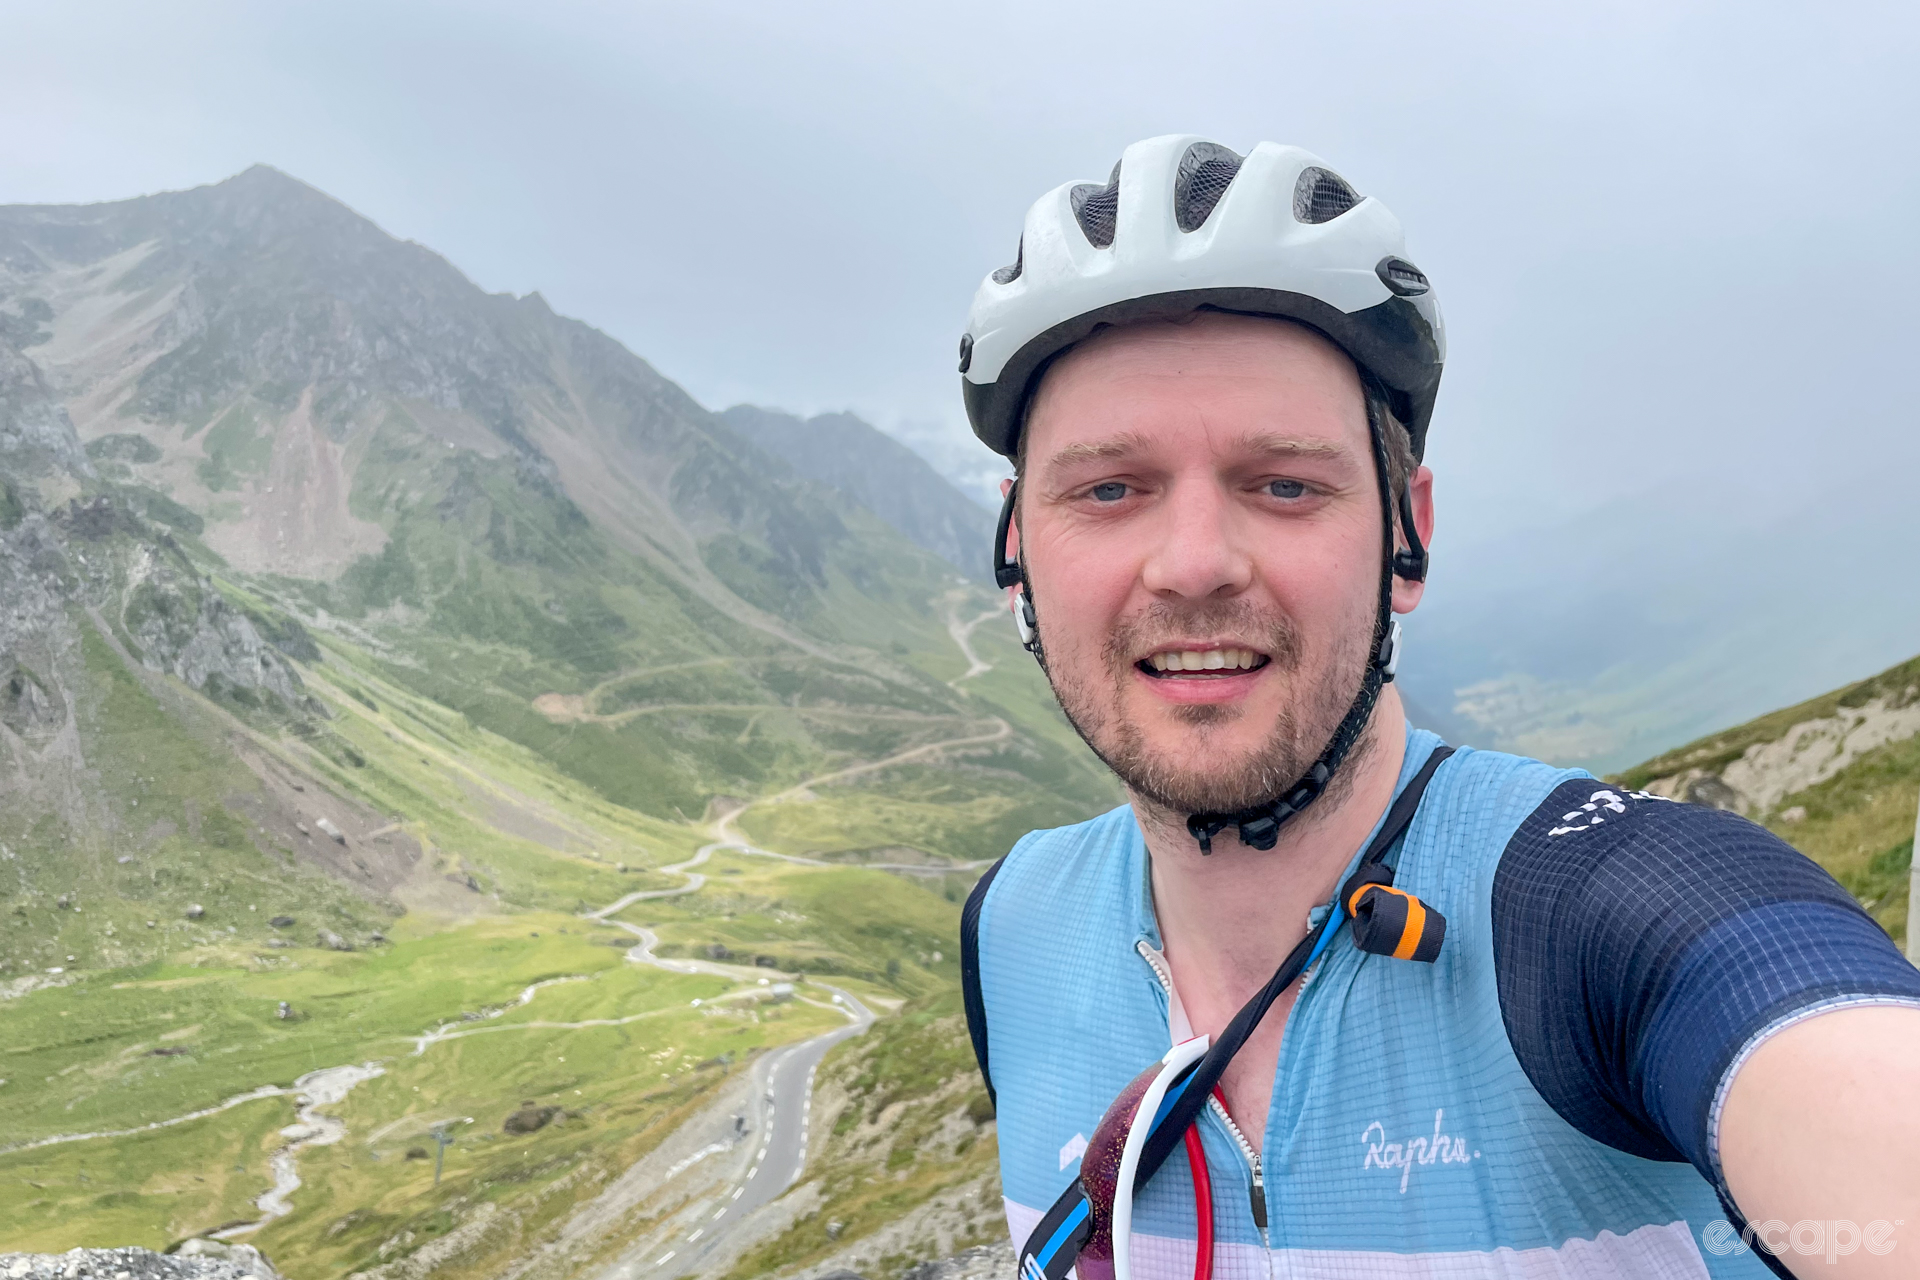 The author on the summit of the Tourmalet, wearing a jersey with light and dark blue blocks and a white helmet. Behind him is a road off the Tourmalet, heading down valley.